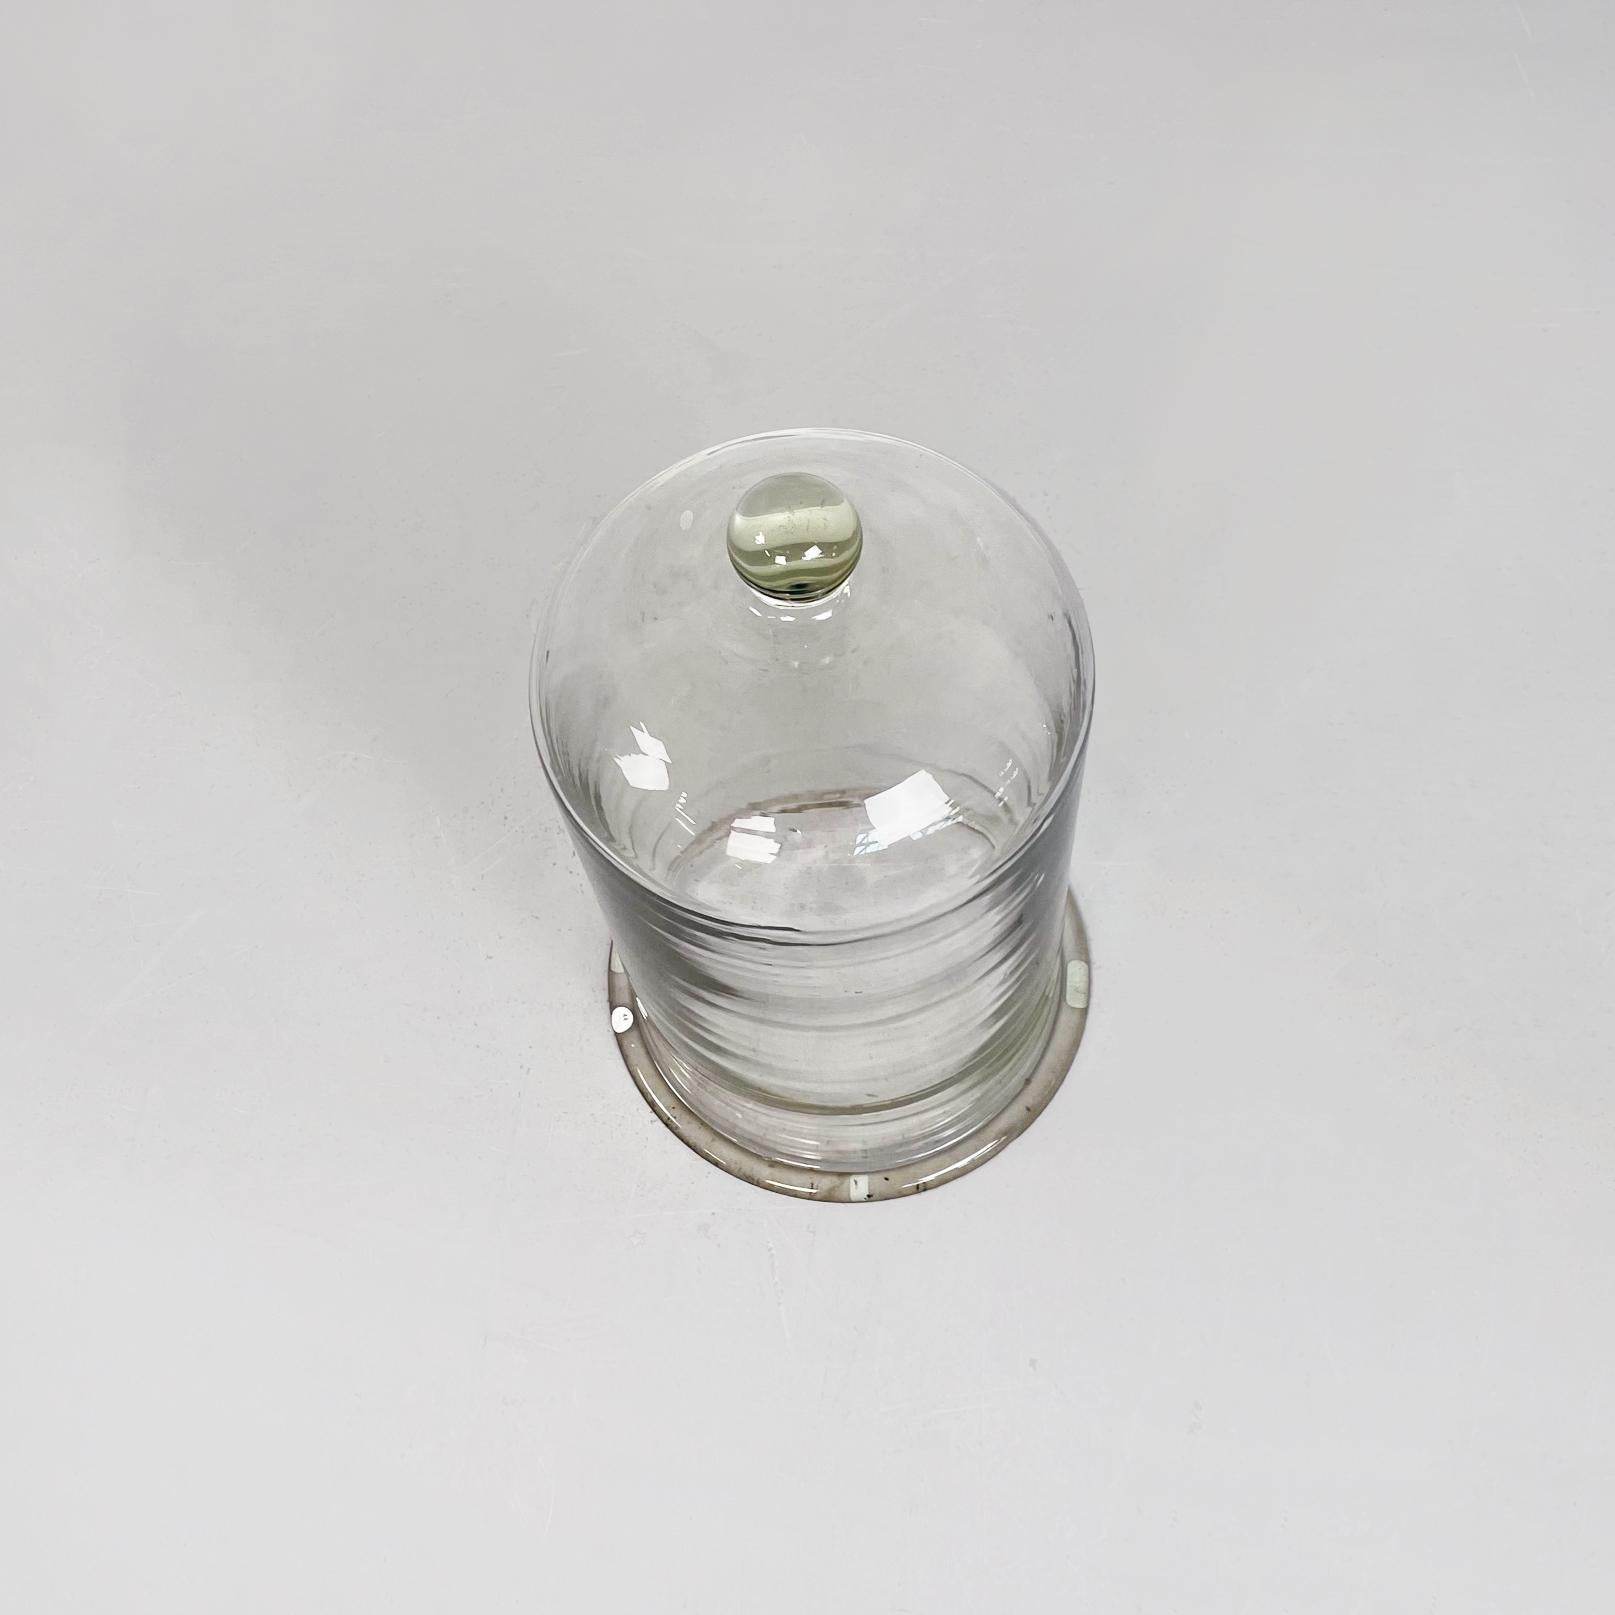 Italian mid-century thick glass bell, 1960s
Glass bell with a round base. On the top it has a glass sphere that allows you to raise the bell easily.

We love to use this glass bell for the plant in the winter, when is very cold and the plant need to